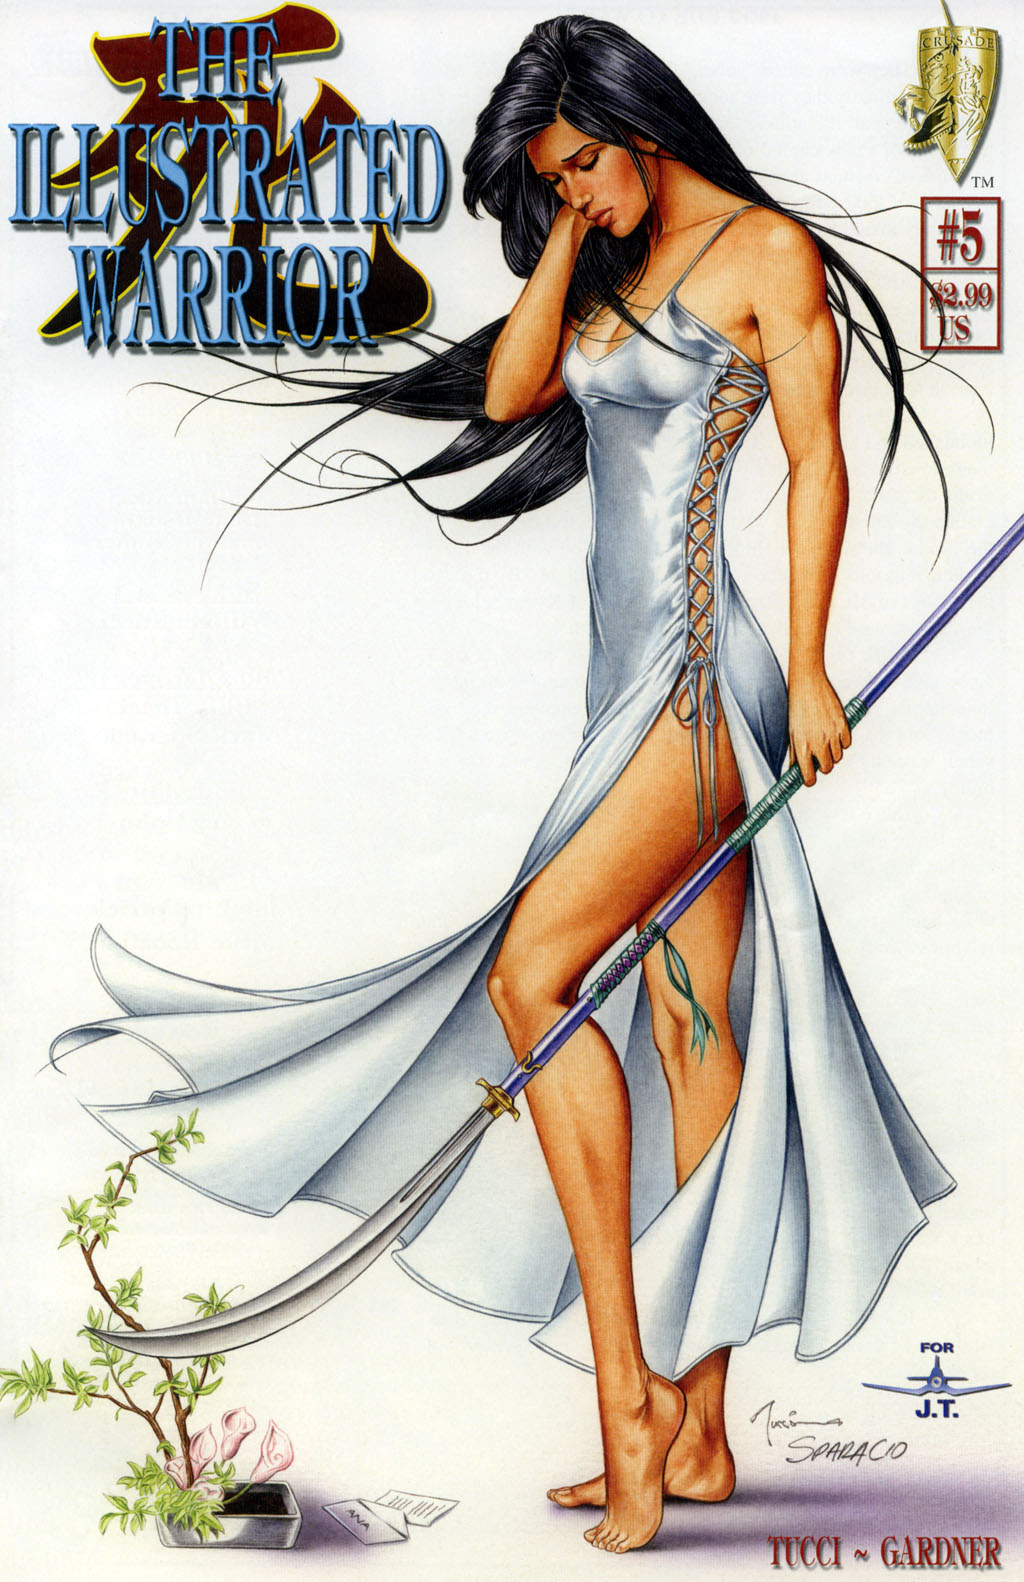 Read online Shi: The Illustrated Warrior comic -  Issue #5 - 1